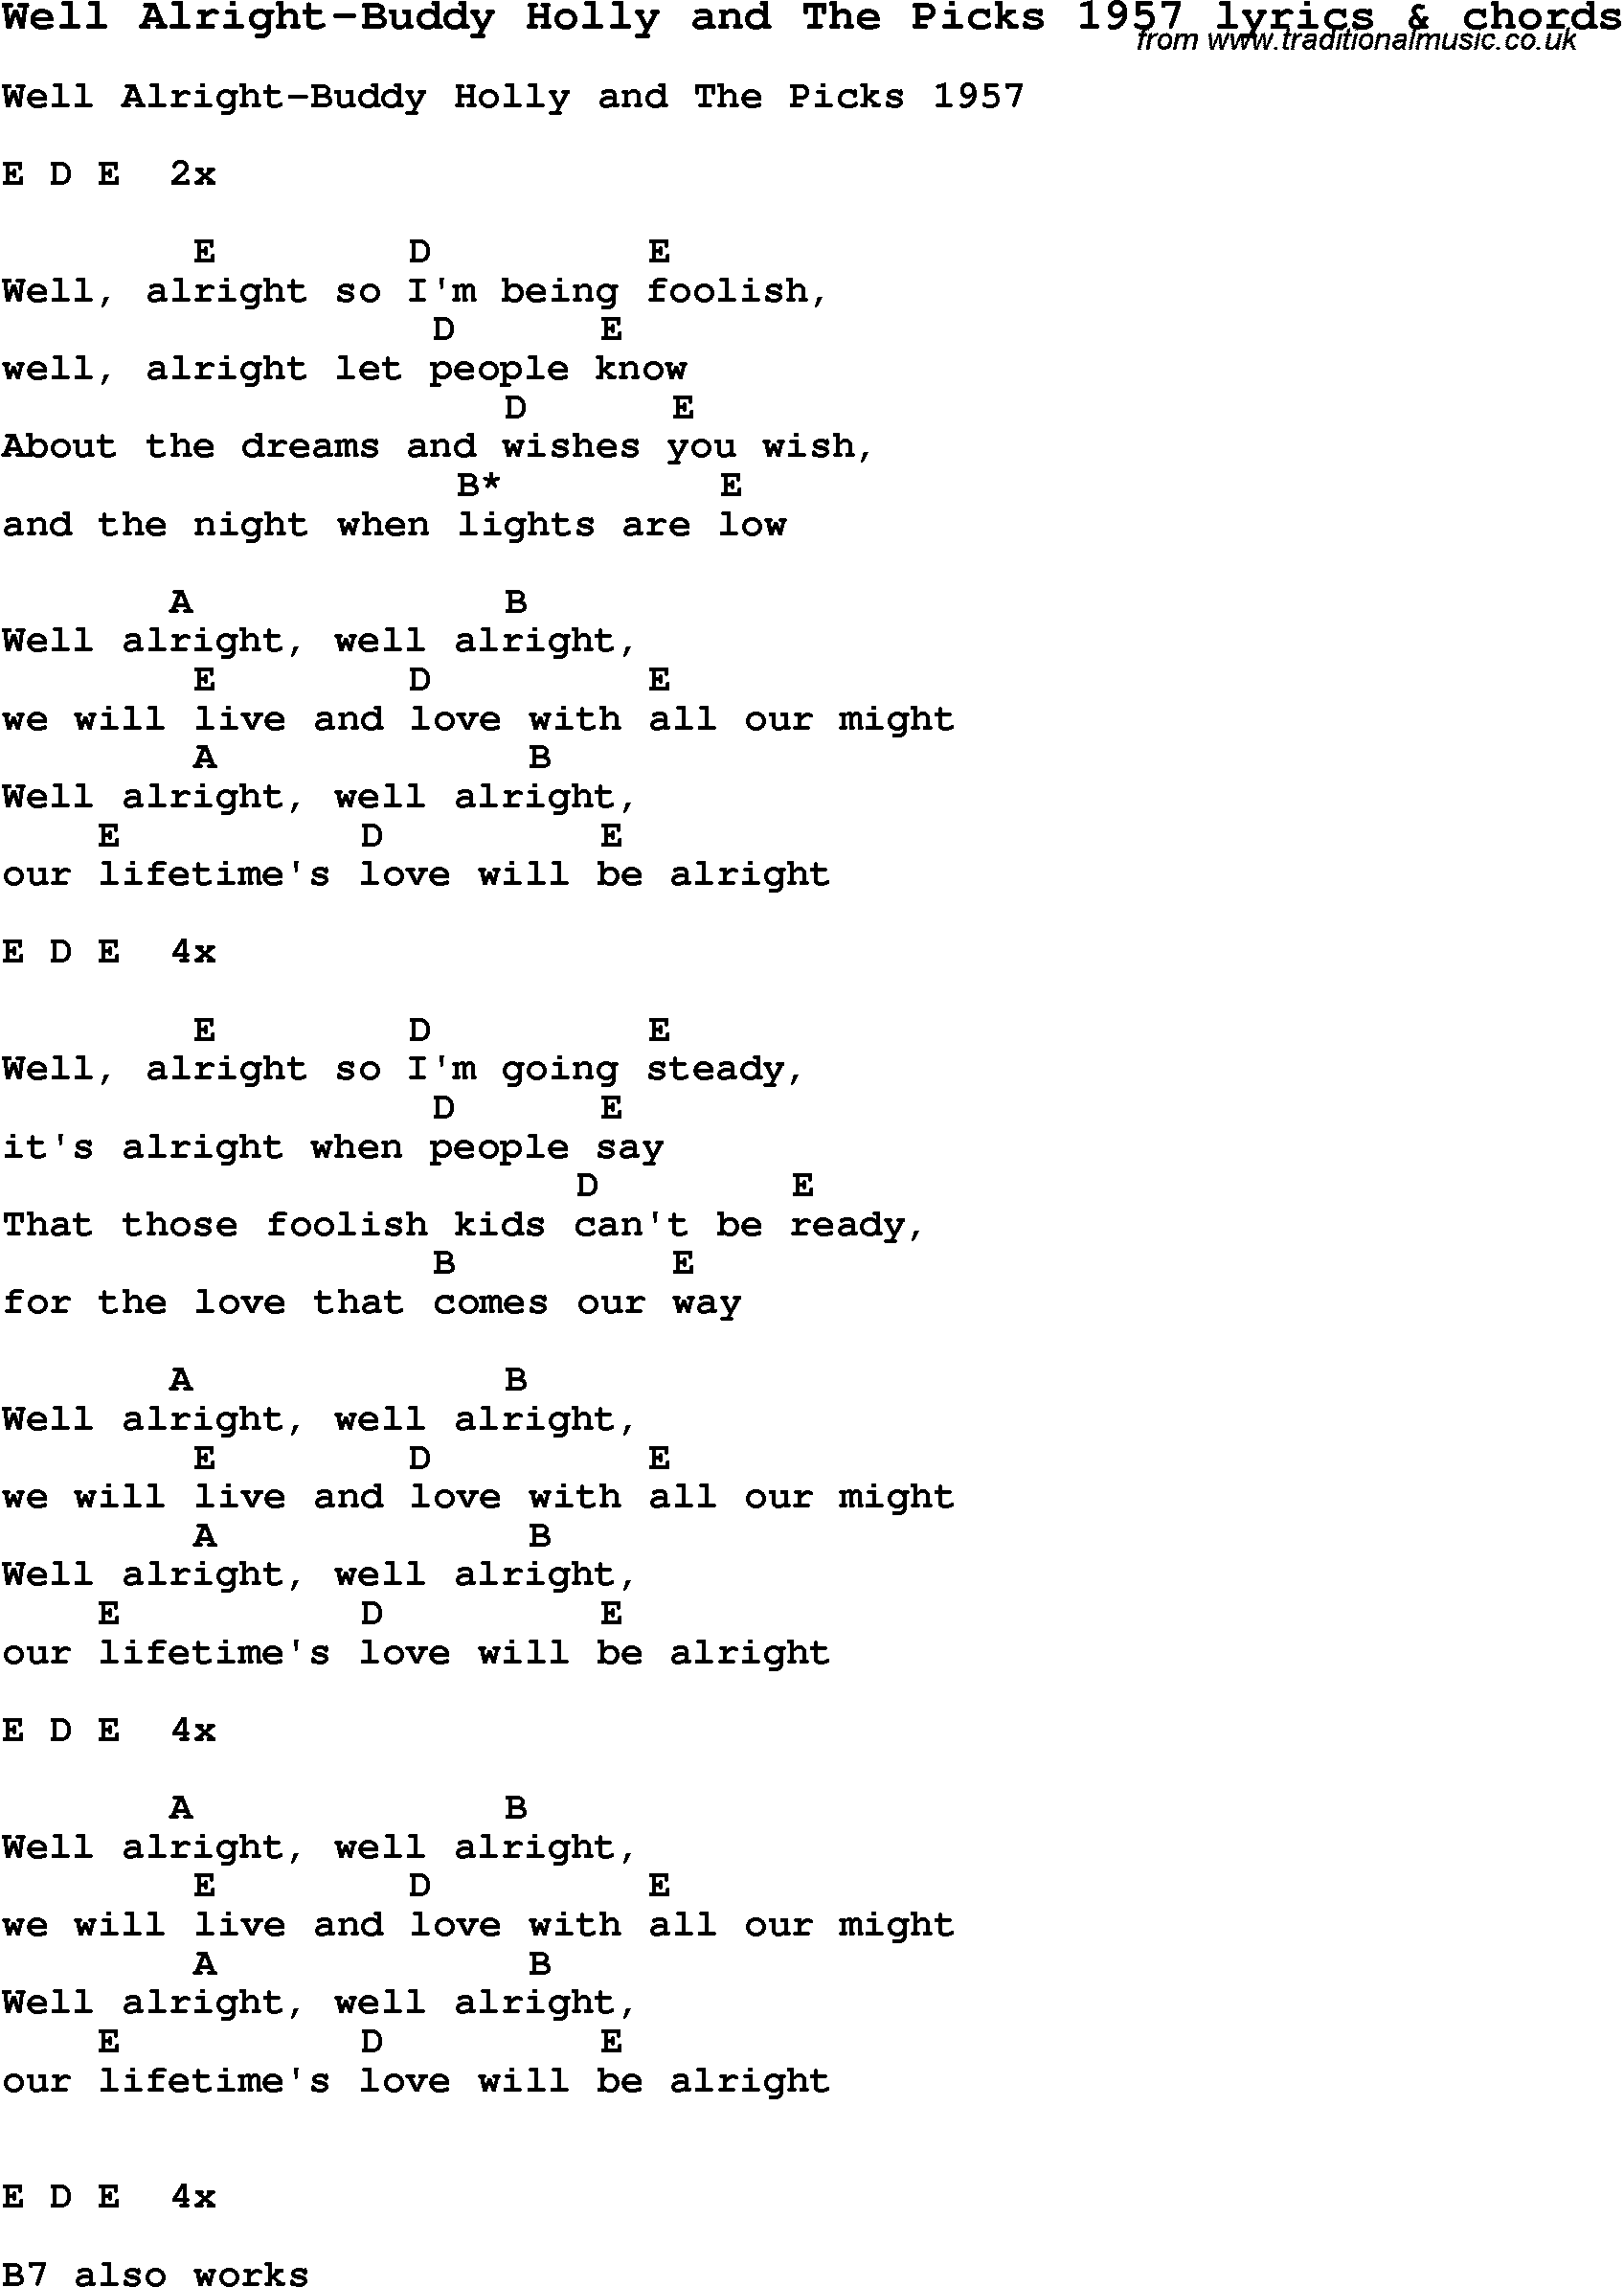 Love Song Lyrics for: Well Alright-Buddy Holly and The Picks 1957 with chords for Ukulele, Guitar Banjo etc.